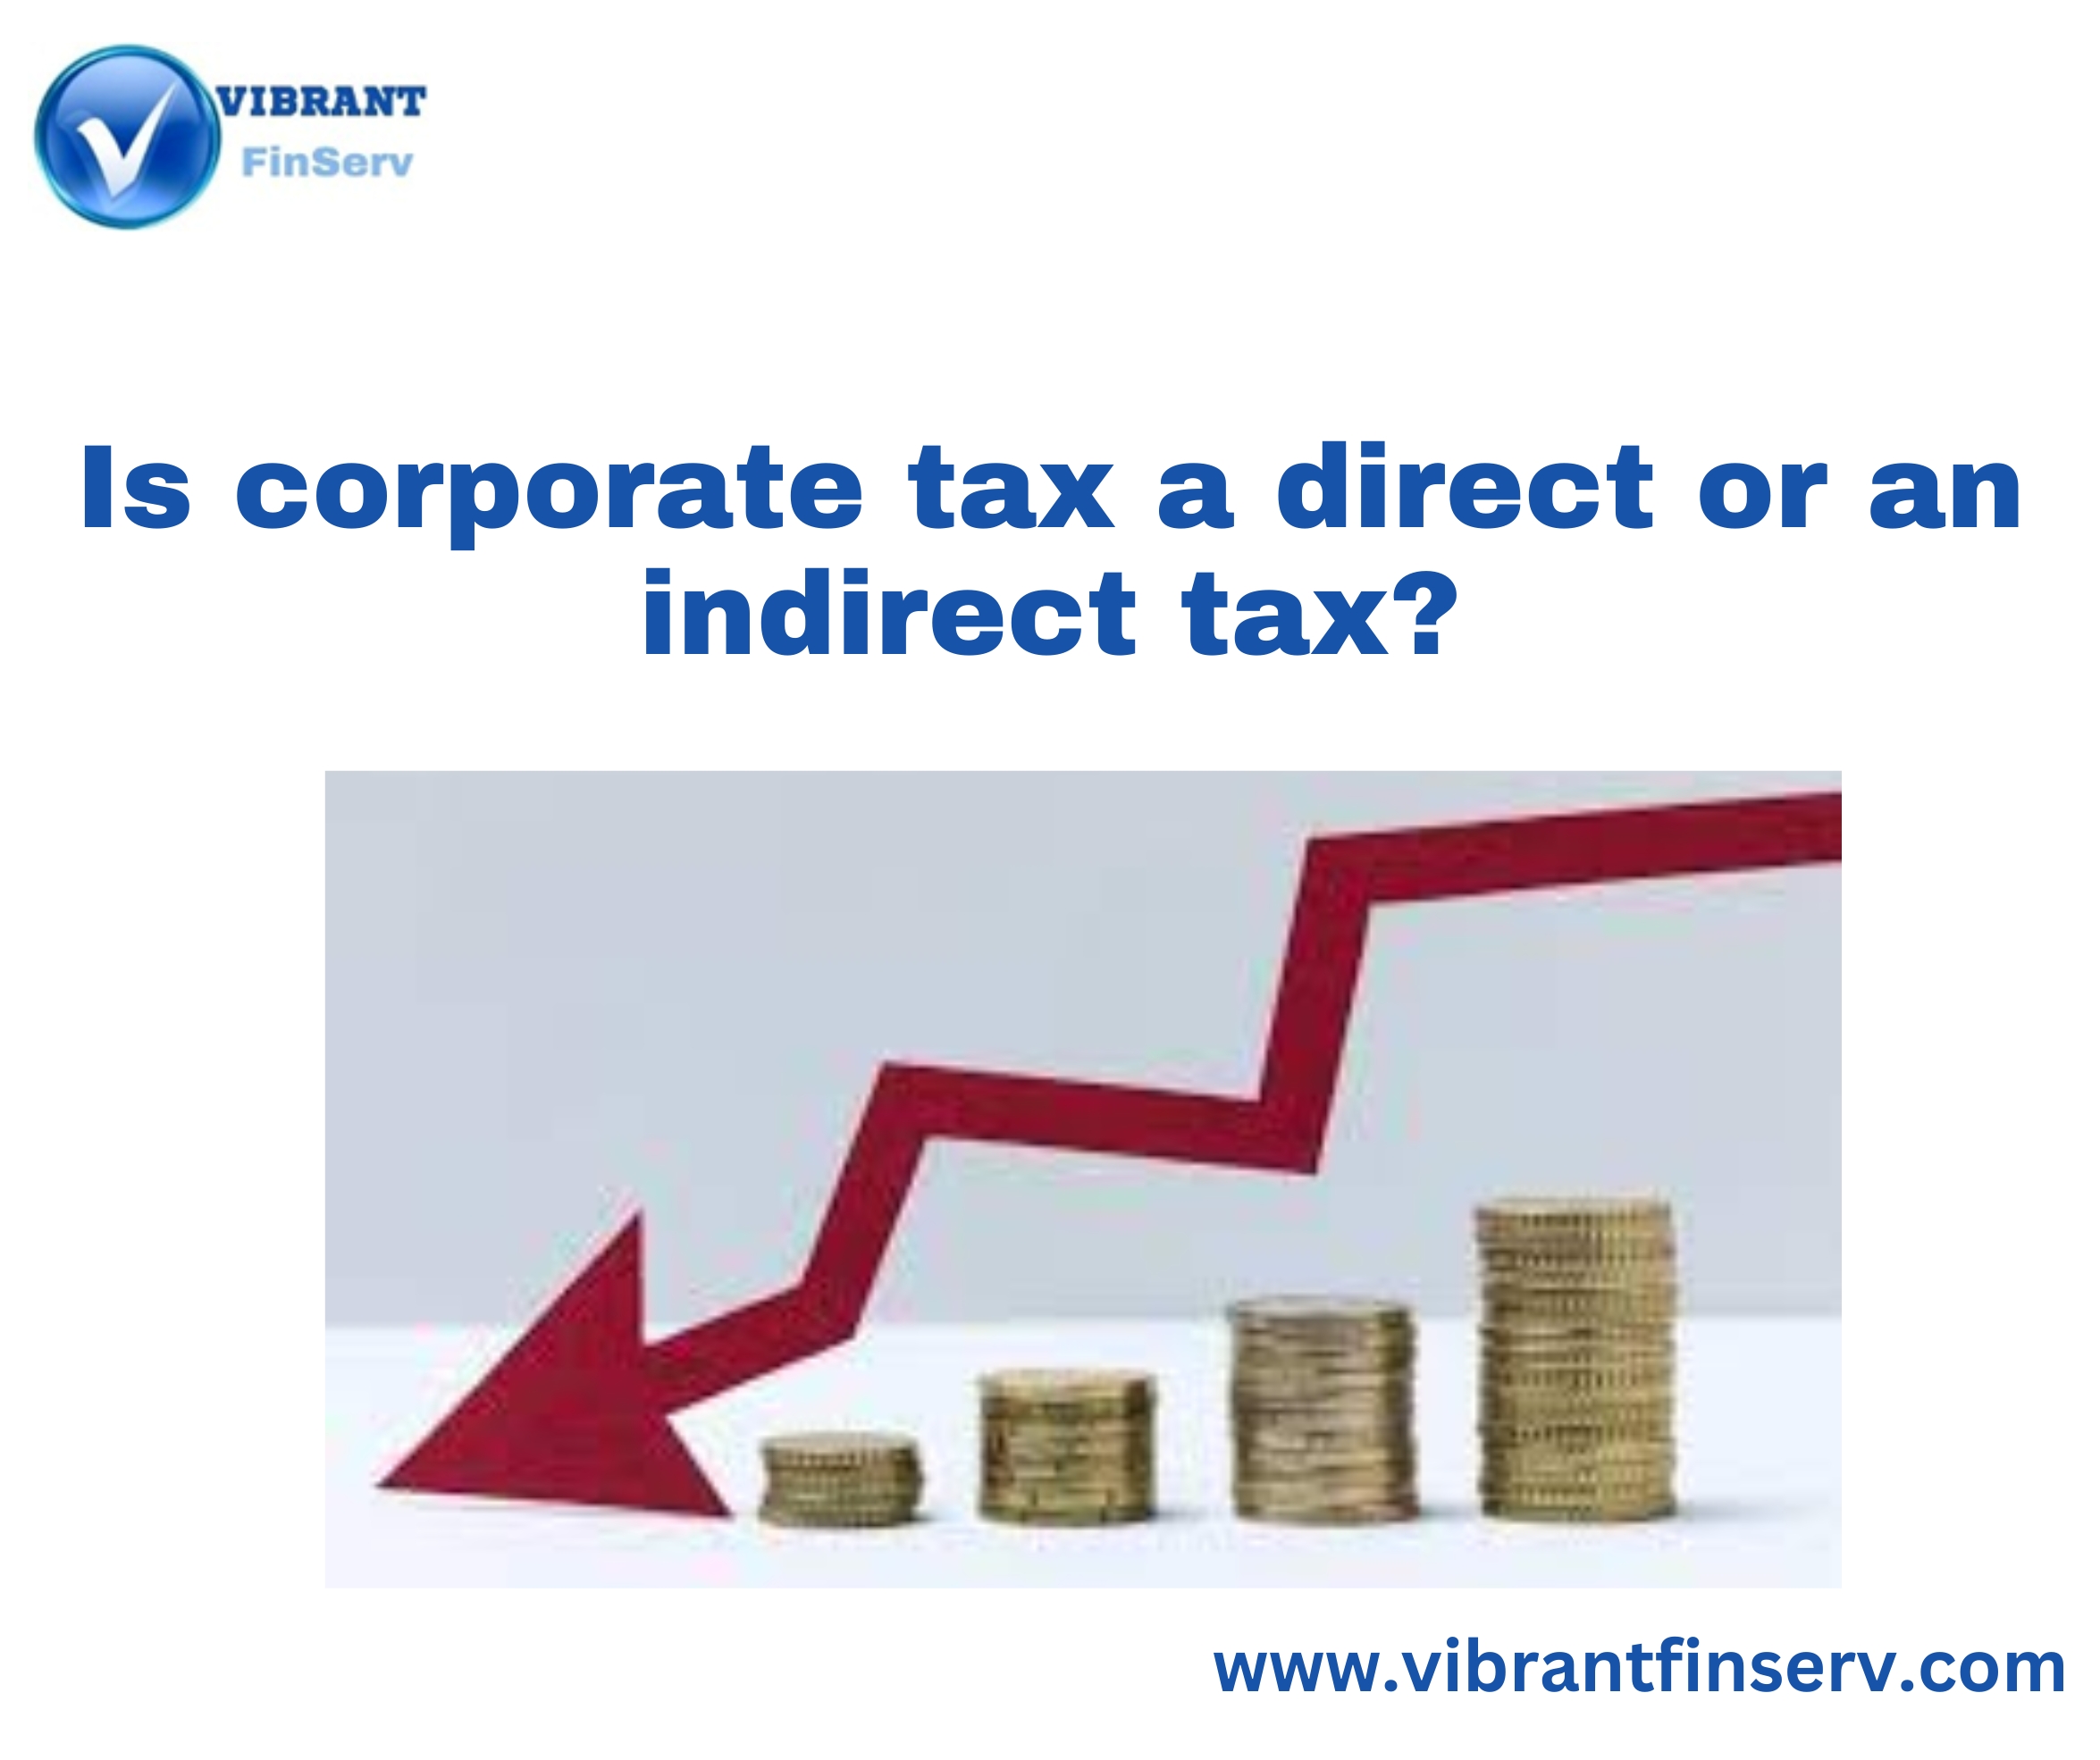 Corporate Tax is a type of direct tax